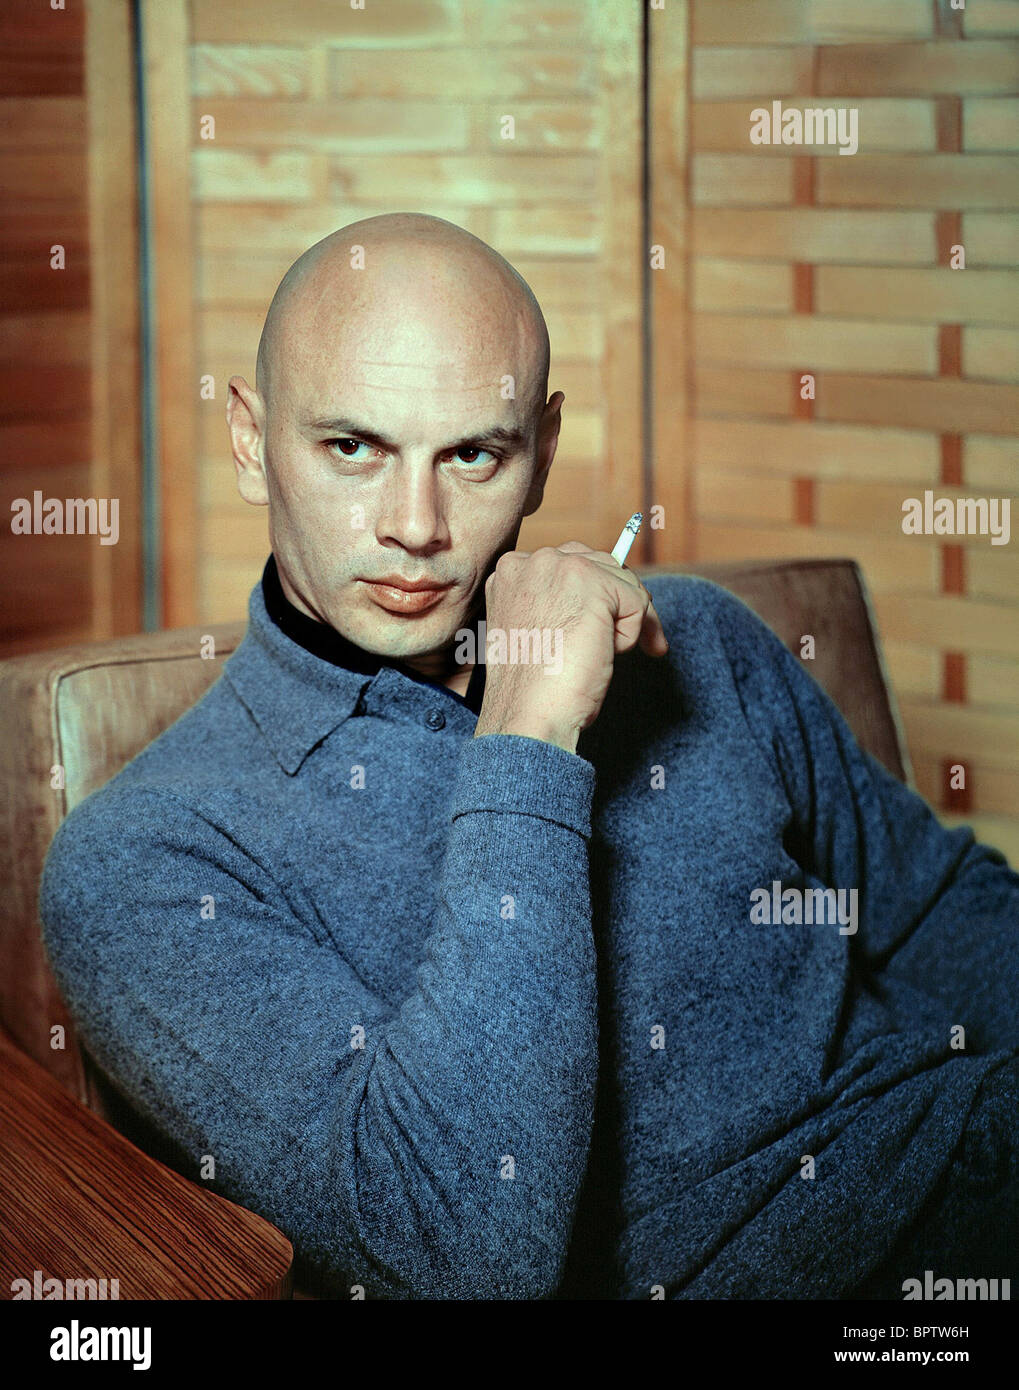 YUL BRYNNER ACTOR (1959) Stock Photo